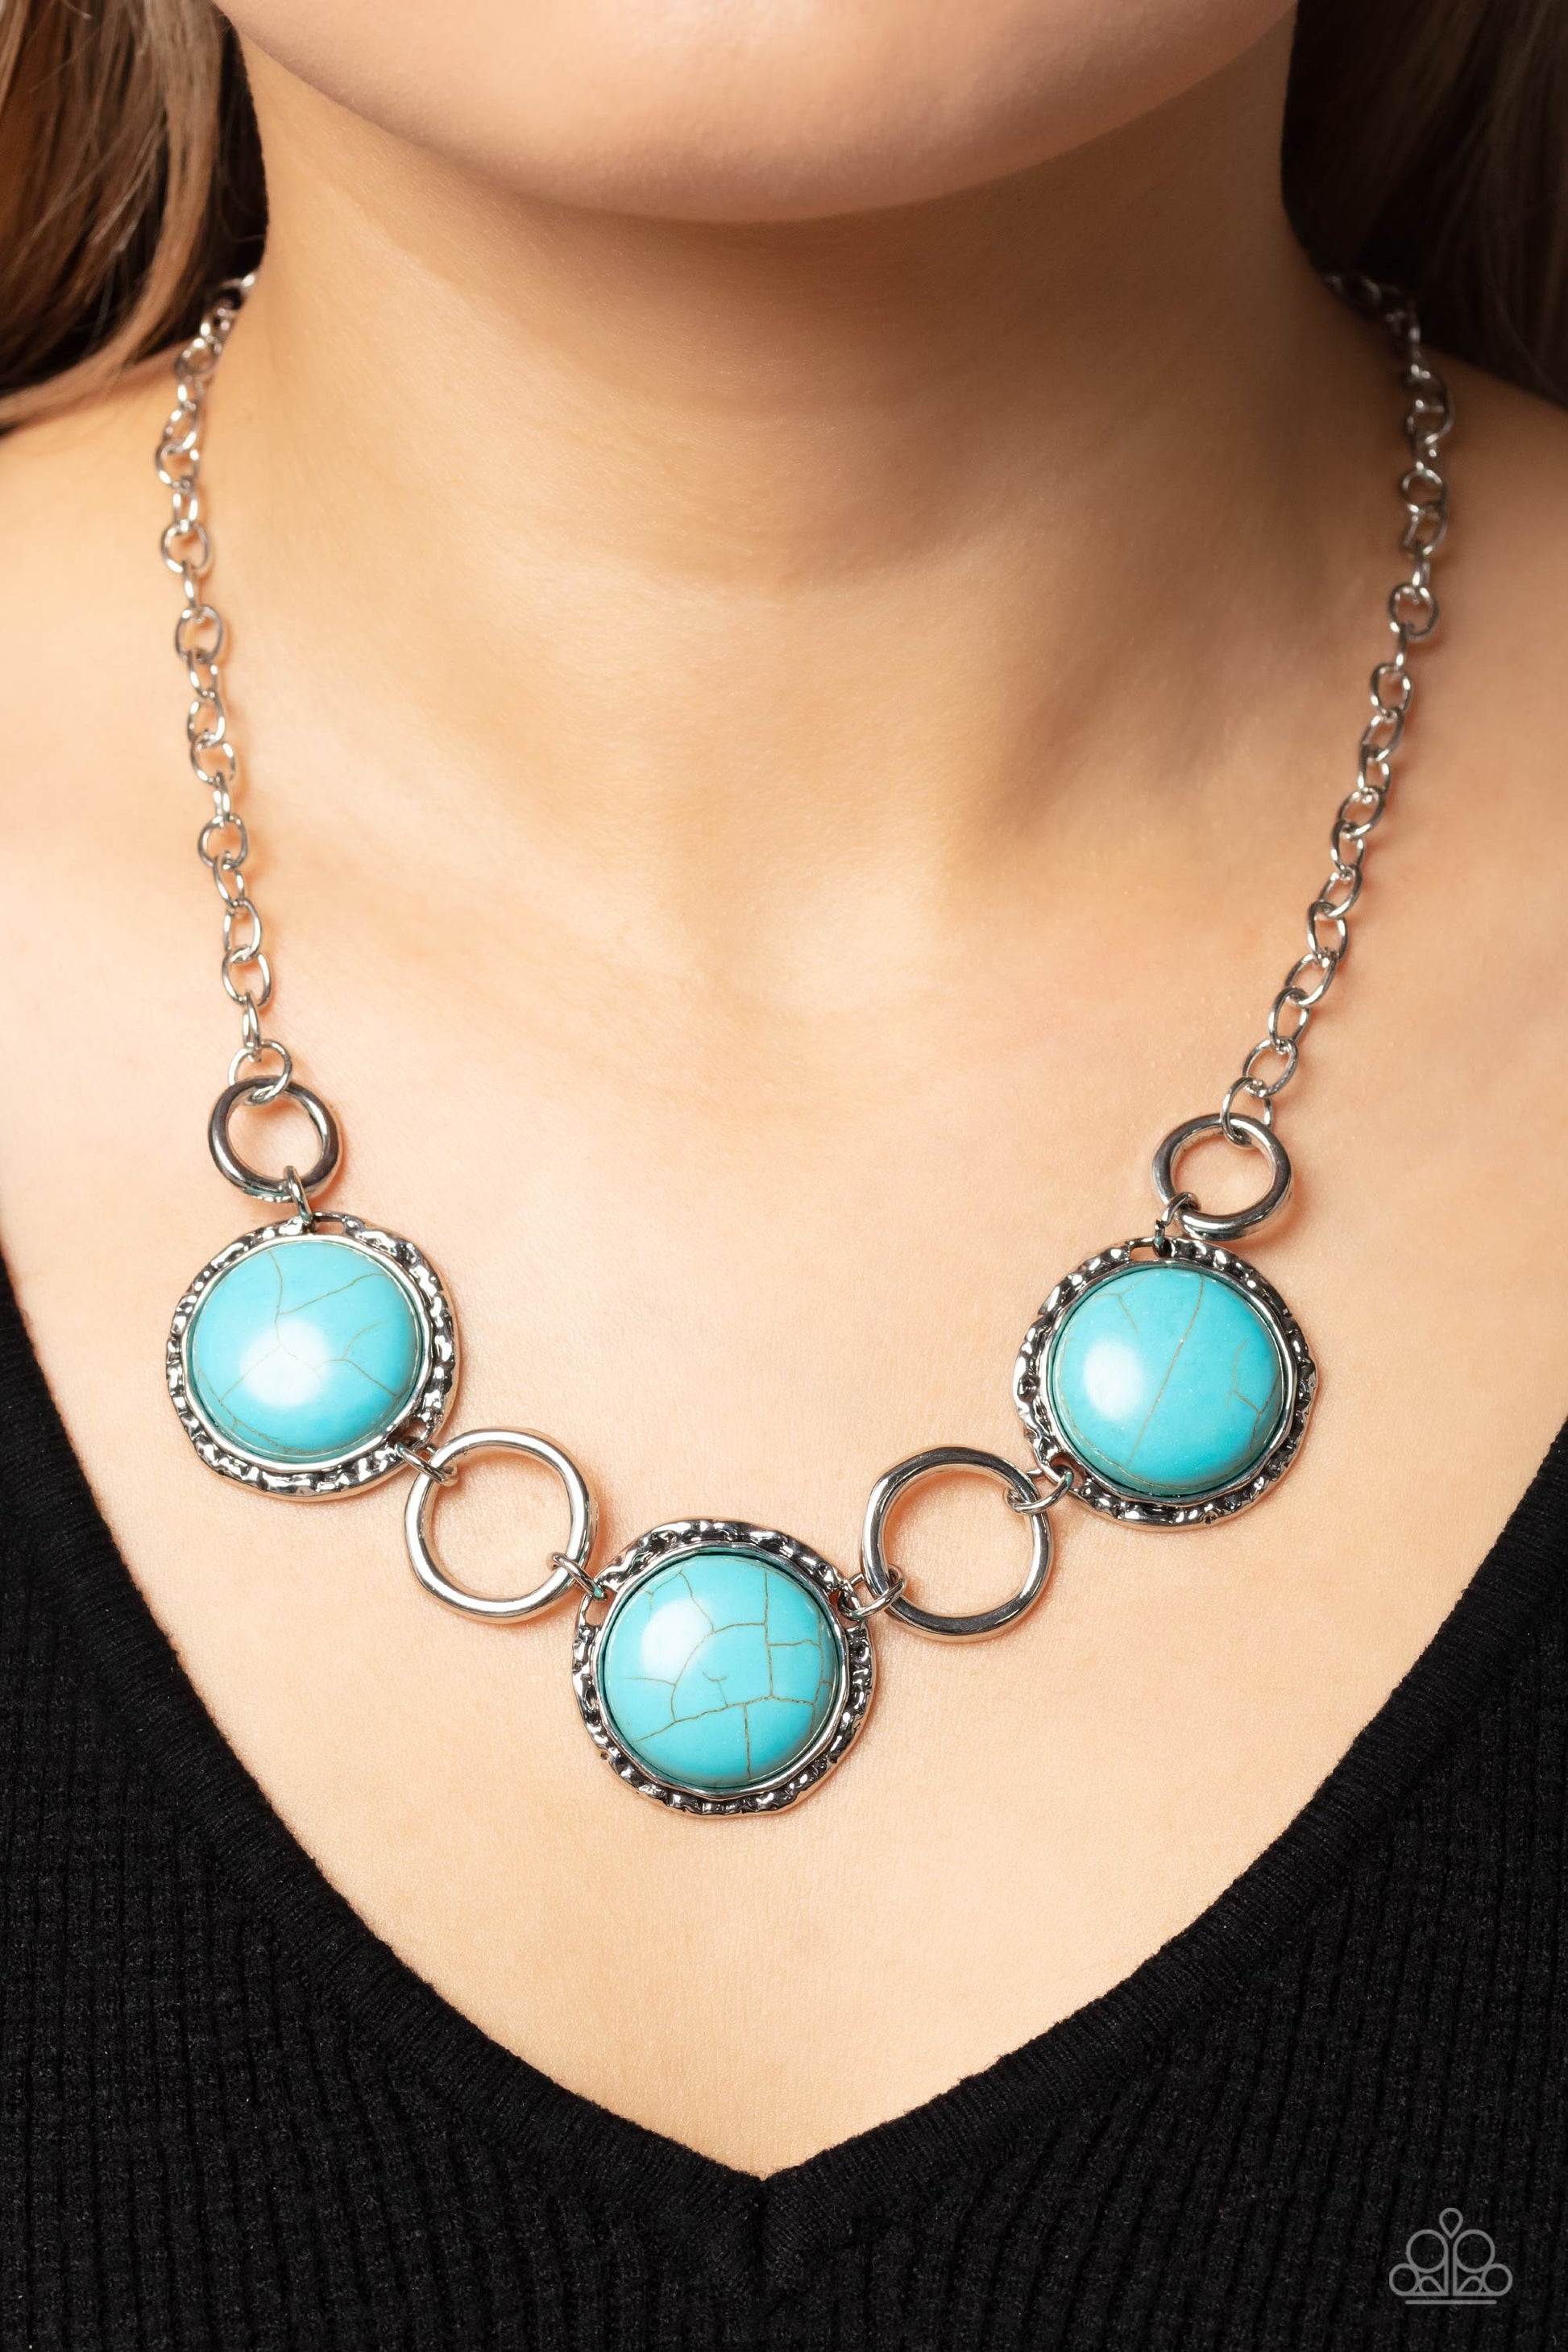 Saharan Scope - Blue Turquoise and Silver Necklace - Paparazzi Accessories - Warped silver hoops in varying sizes alternate along hammered silver frames. Pressed into the hammered frames, oversized turquoise stones add a vibrant, earthy flair to the summery palette. Features an adjustable clasp closure.